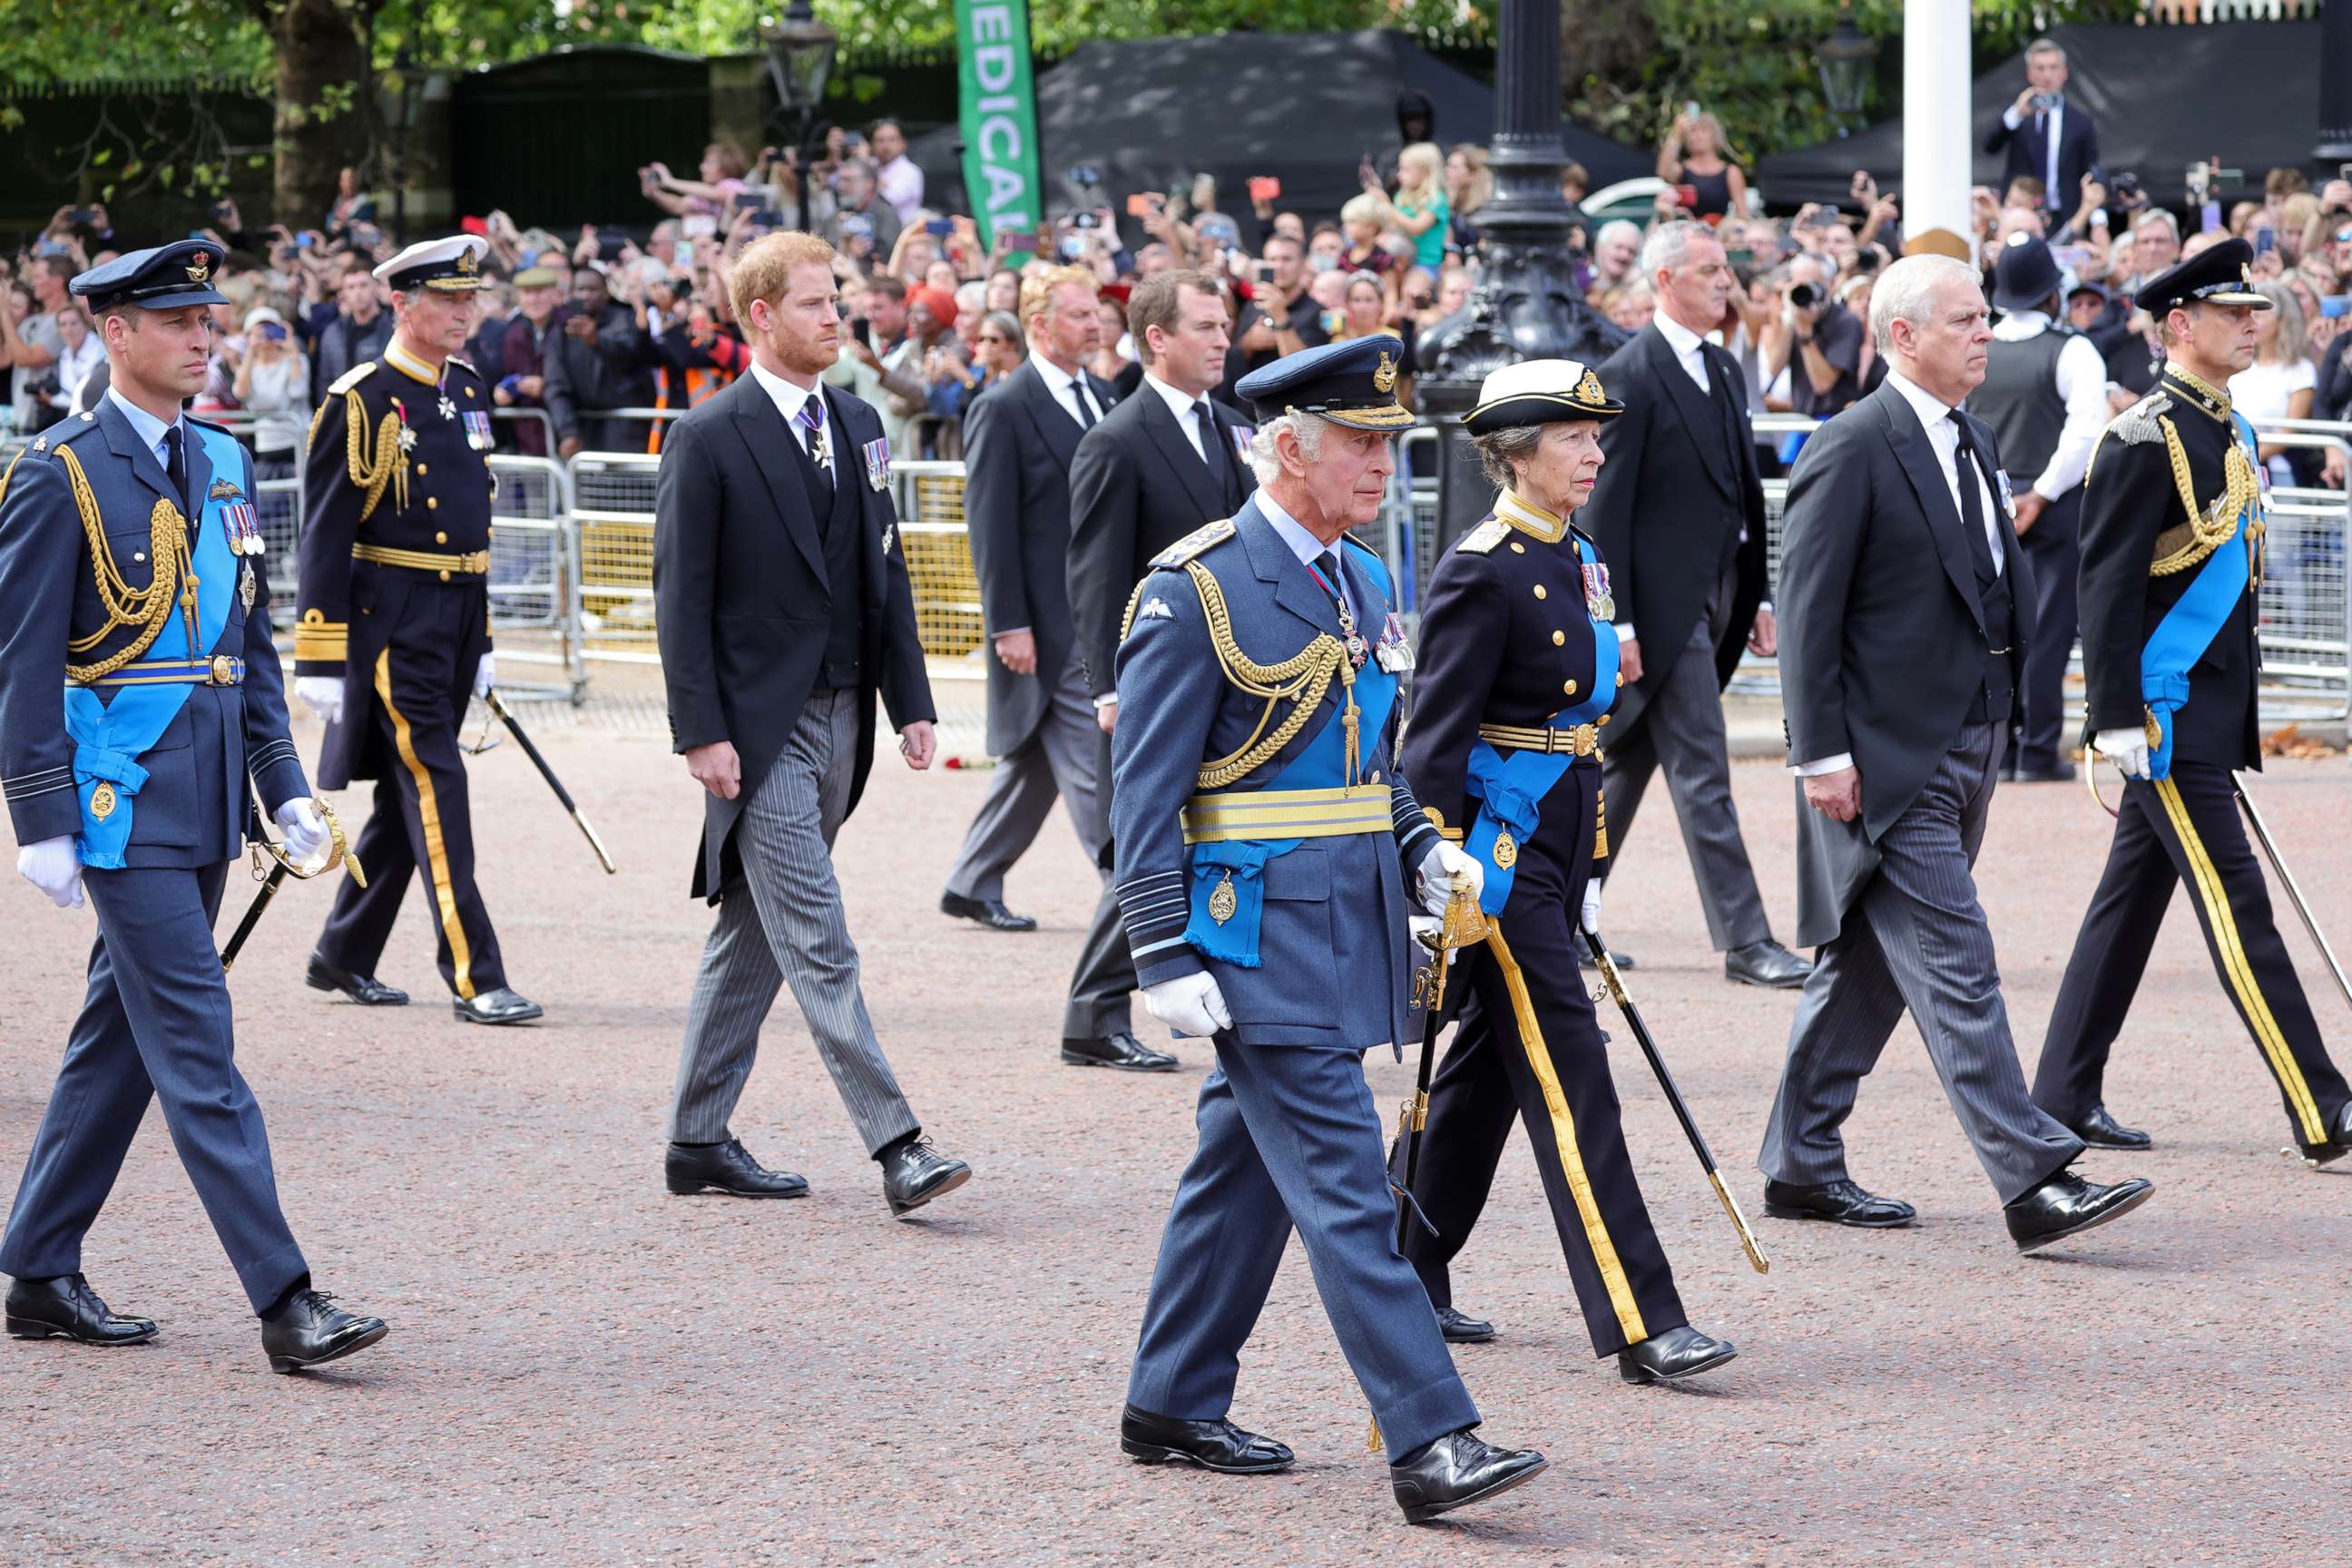 PHOTO: The royals walk behind the coffin during the procession for the Lying-in State of Queen Elizabeth II on Sept. 14, 2022 in London.